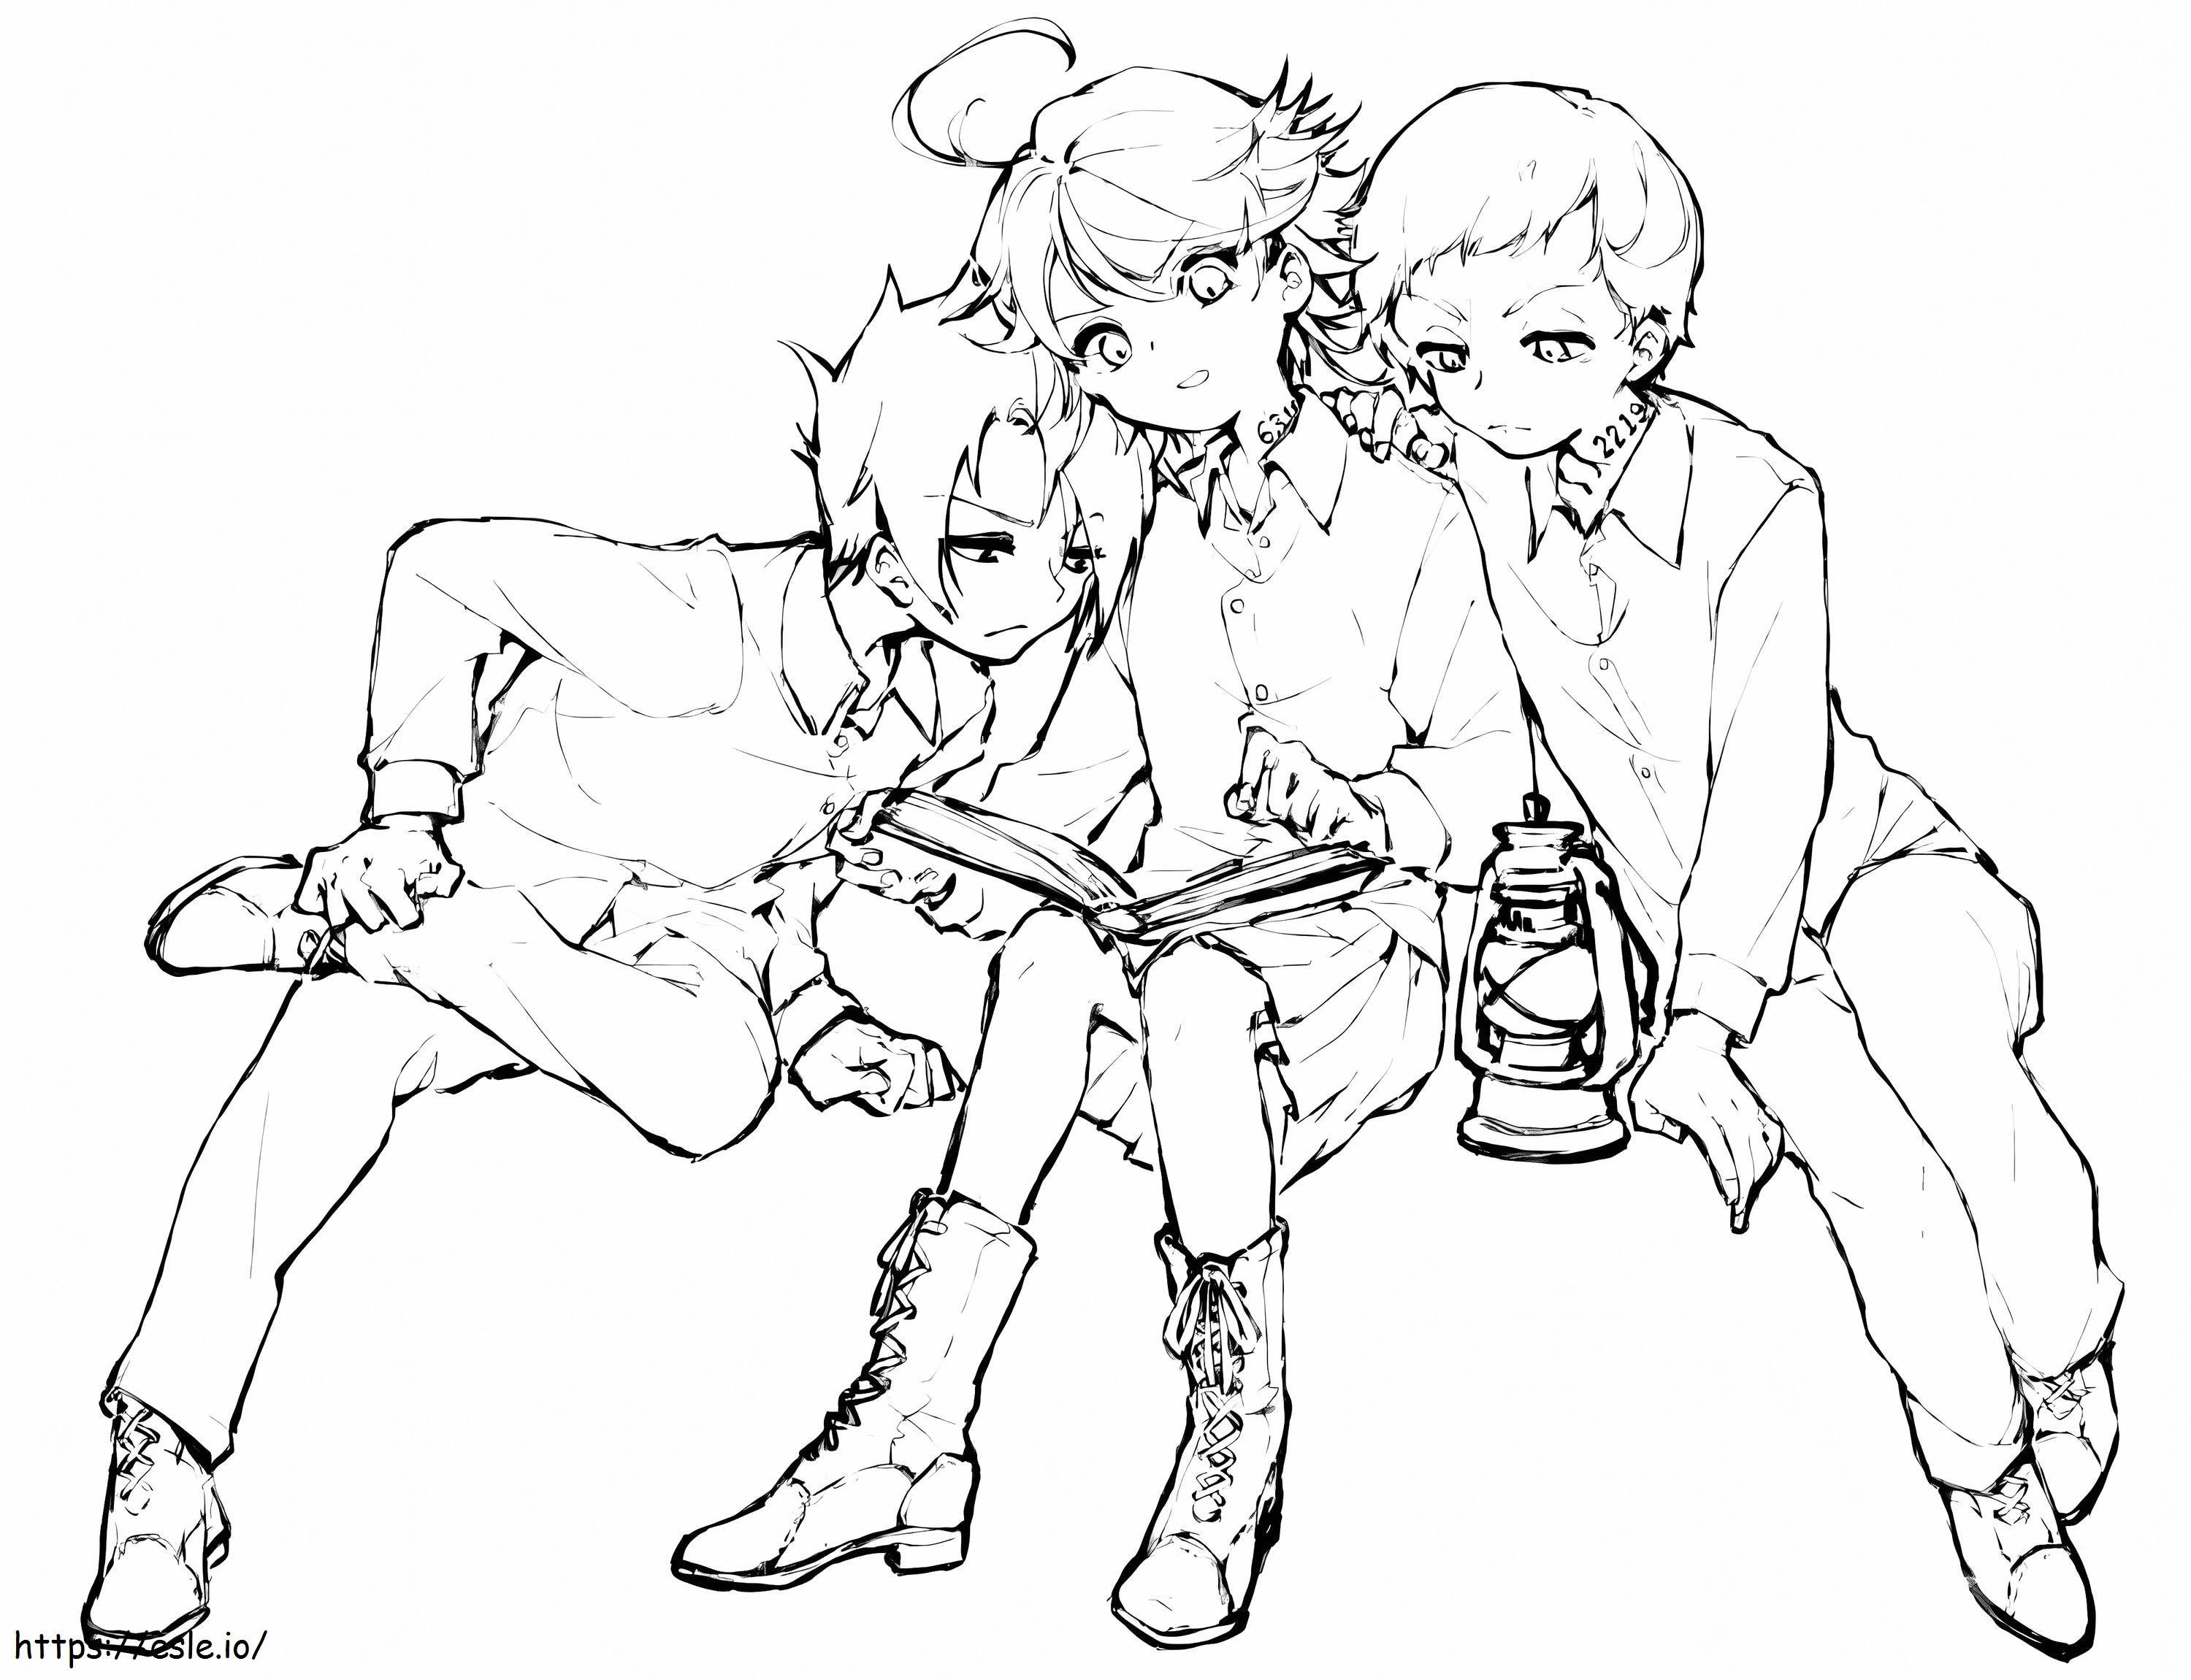 The Promised Neverland Sketch coloring page